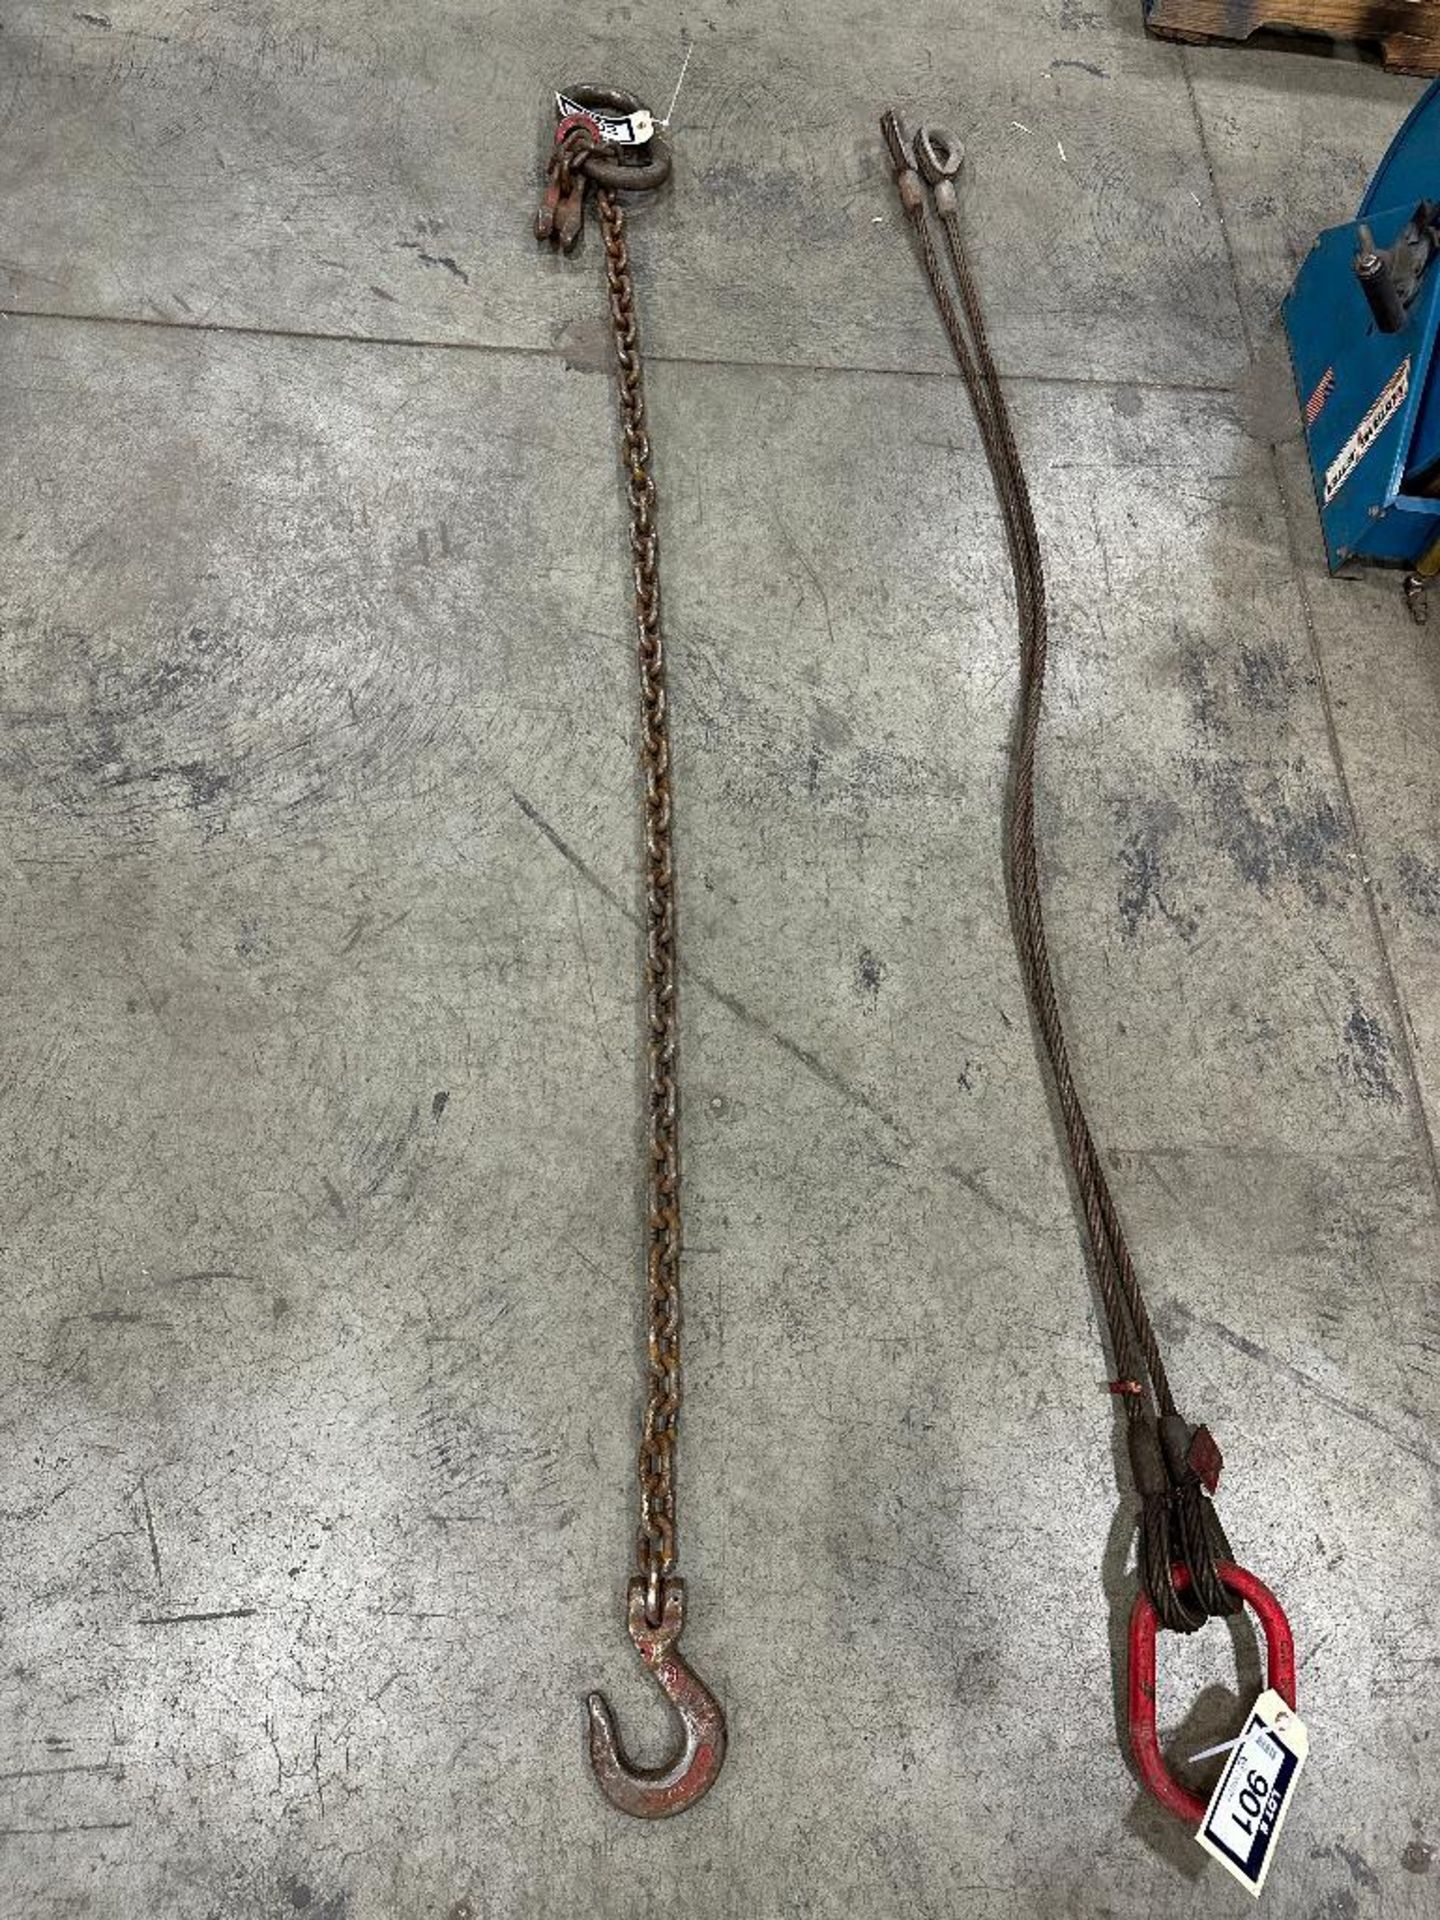 6' Single Hook Lifting Chain - Image 3 of 5